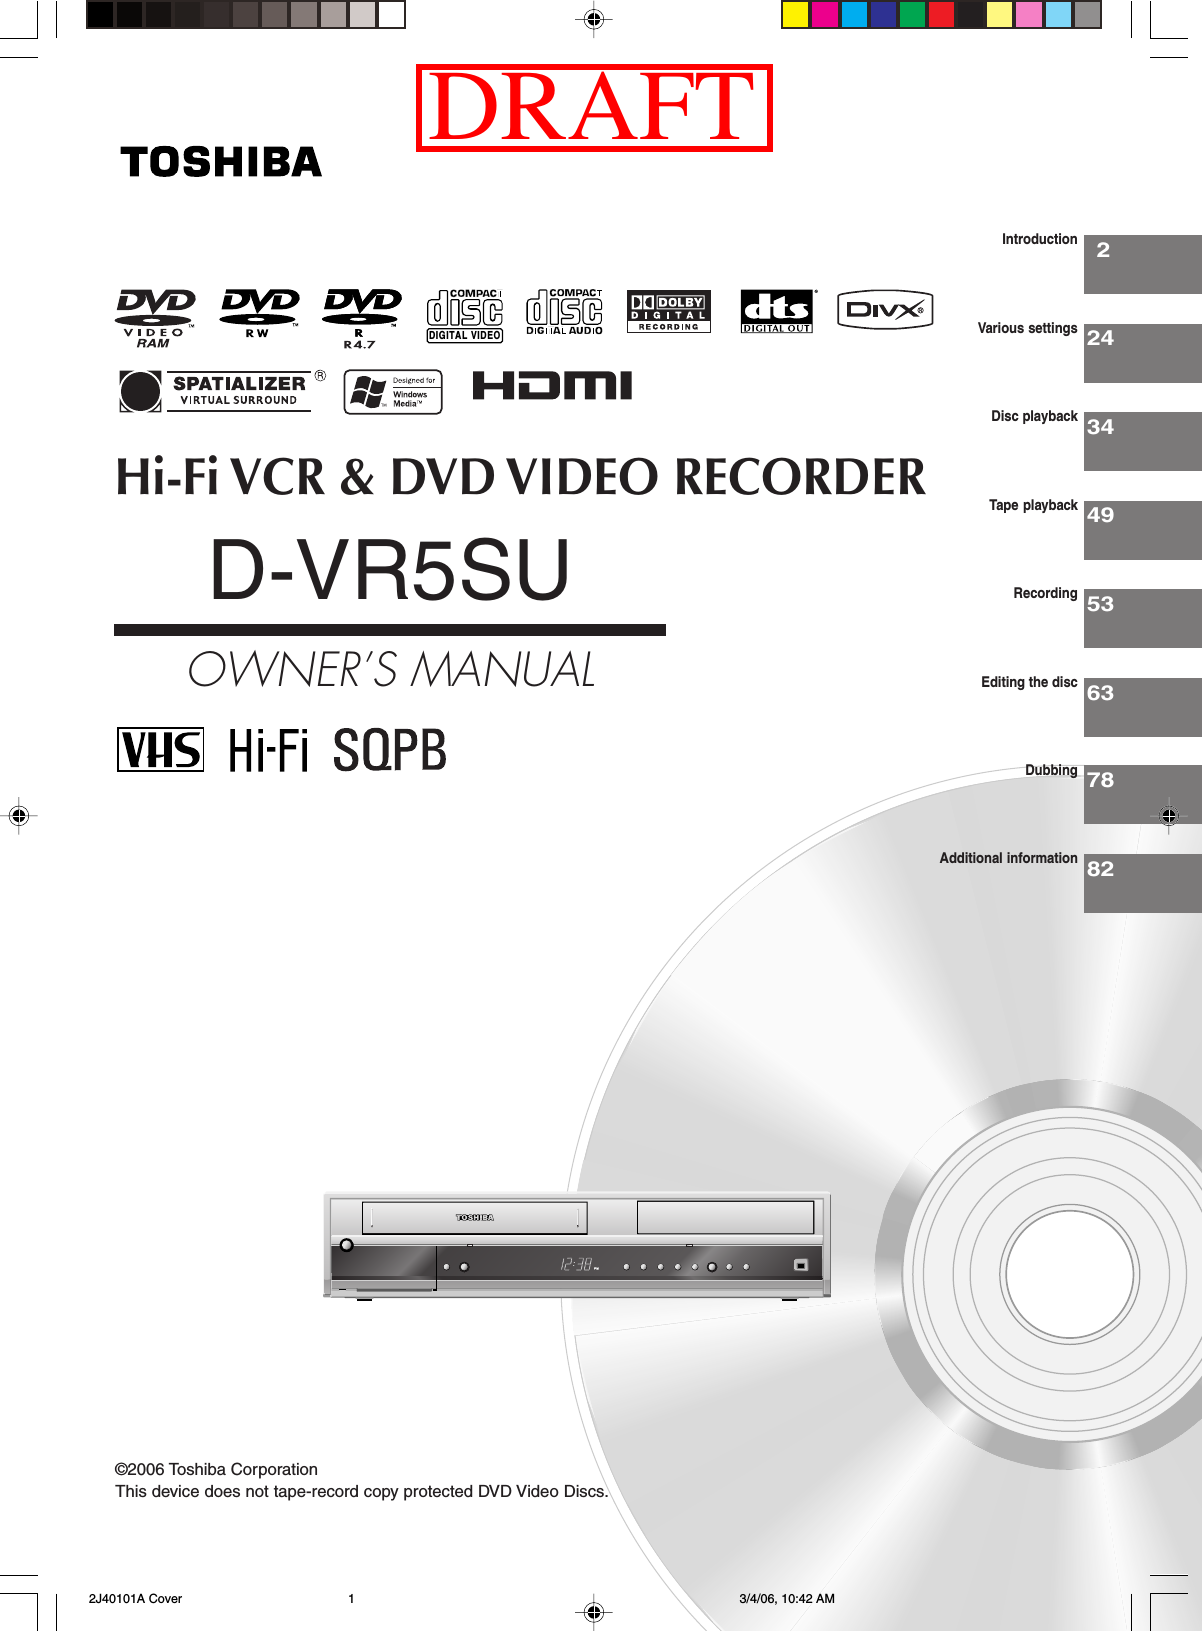 Hi-Fi VCR &amp; DVD VIDEO RECORDERD-VR5SUOWNER’S MANUAL22434495363IntroductionVarious settingsDisc playbackTape playbackRecordingEditing the disc©2006 Toshiba Corporation7882DubbingAdditional informationThis device does not tape-record copy protected DVD Video Discs.DIGITAL VIDEO 2J40101A Cover 3/4/06, 10:42 AM1DRAFT